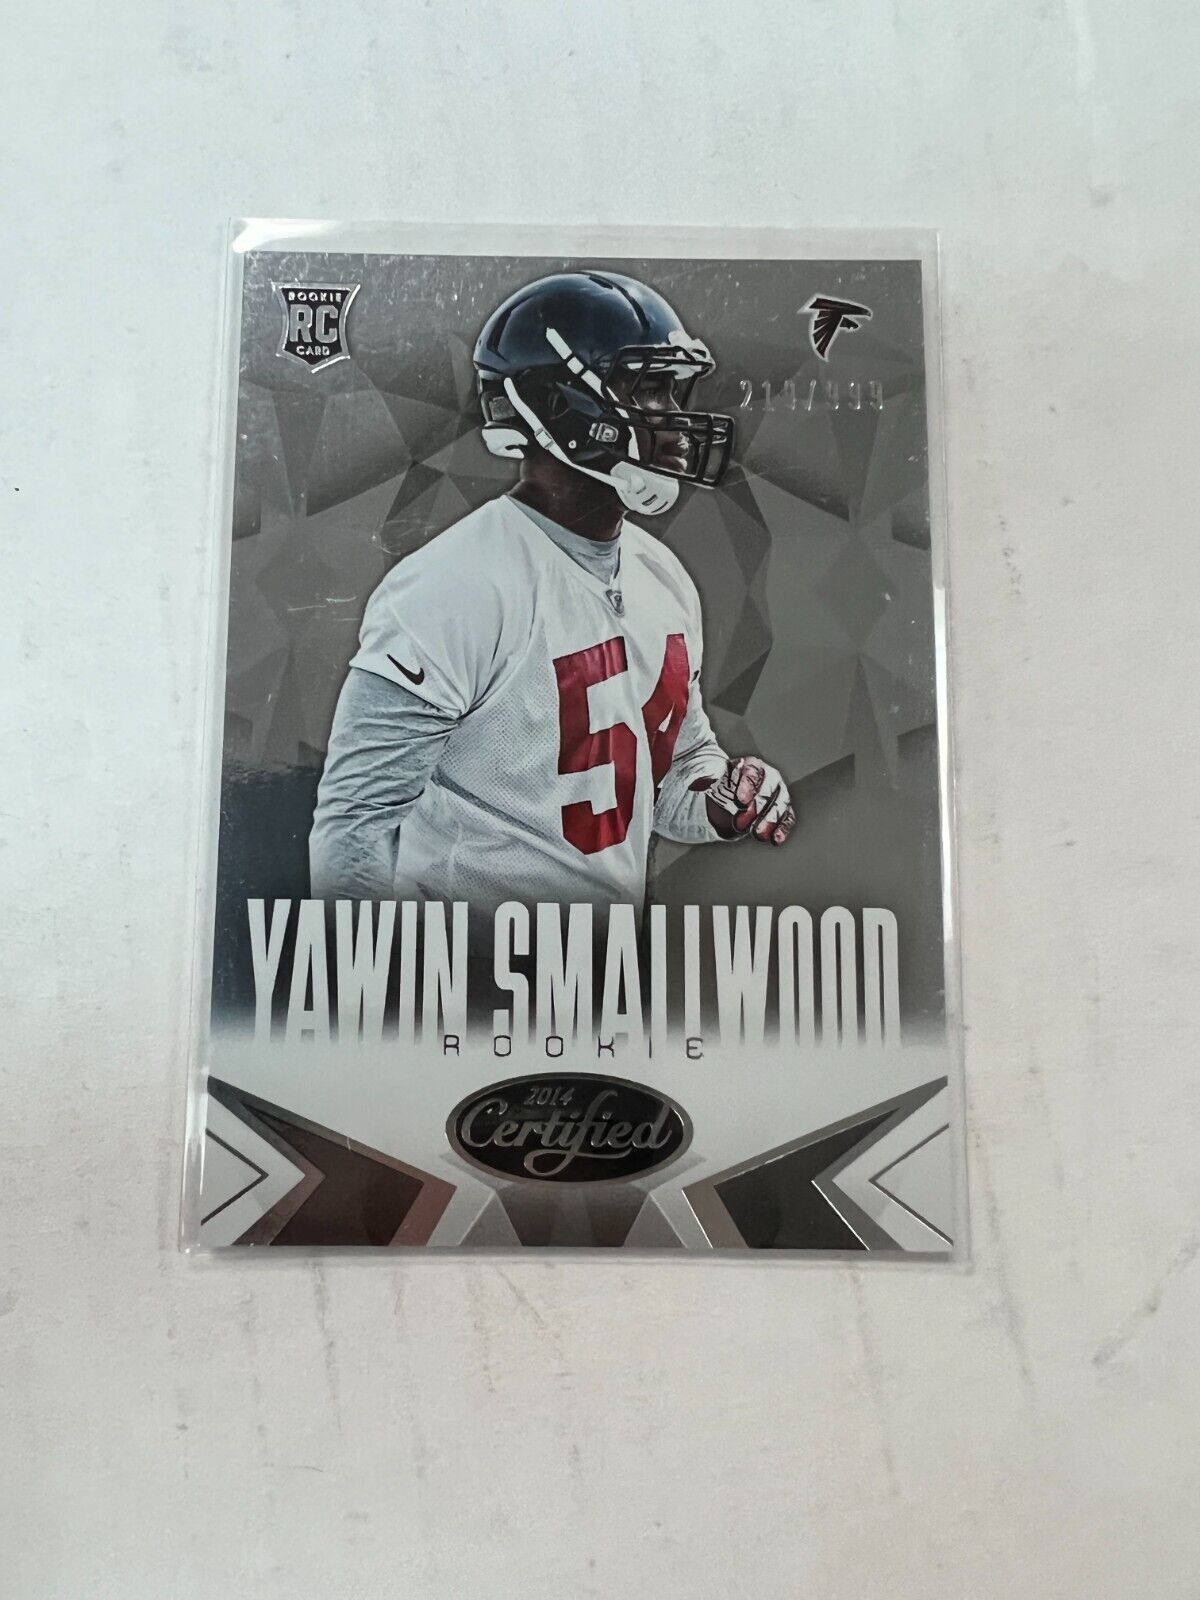 Yawin Smallwood 2014 Certified Rookie Card #173 Serial #219/999. rookie card picture